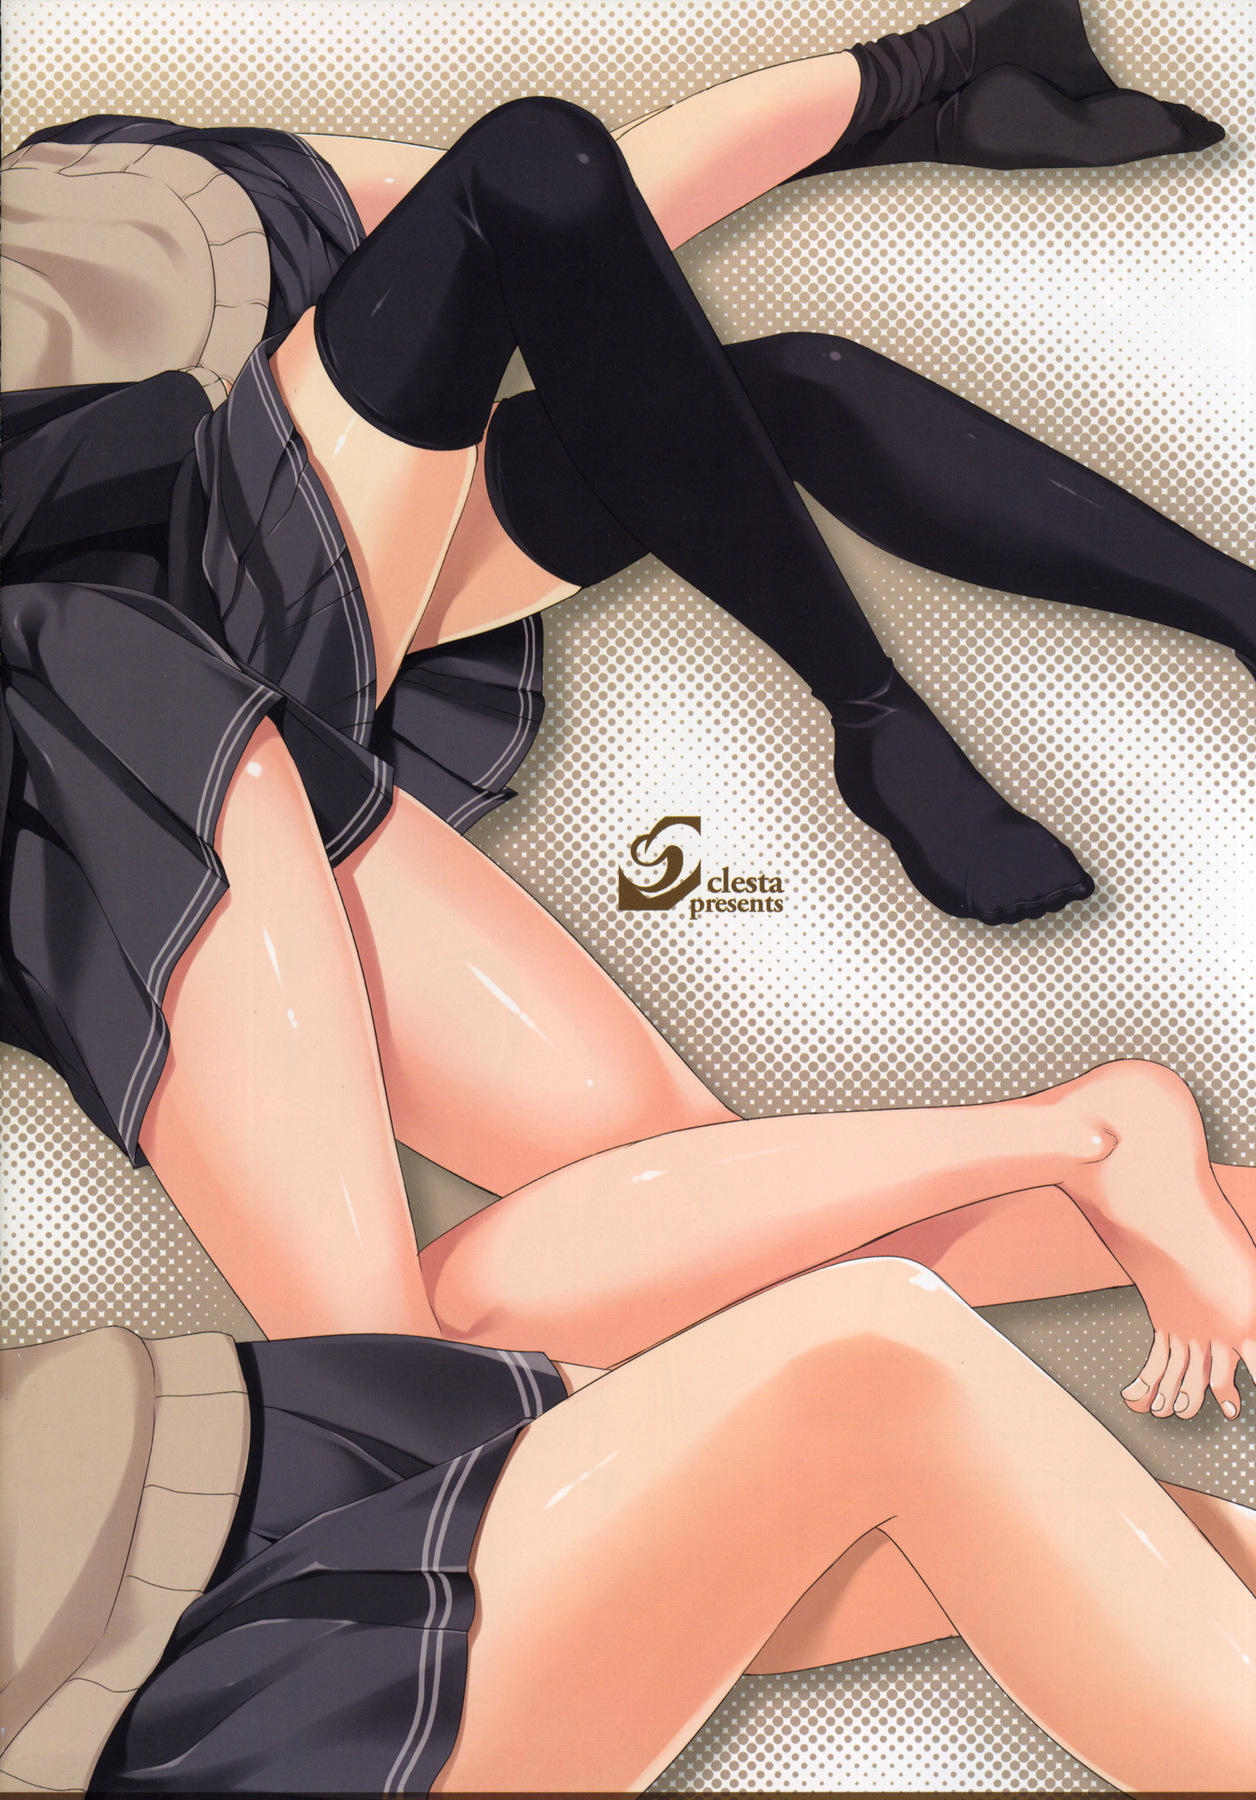 (COMIC1☆3)[Clesta (Cle Masahiro)] CL-orz'4 (Amagami) page 17 full